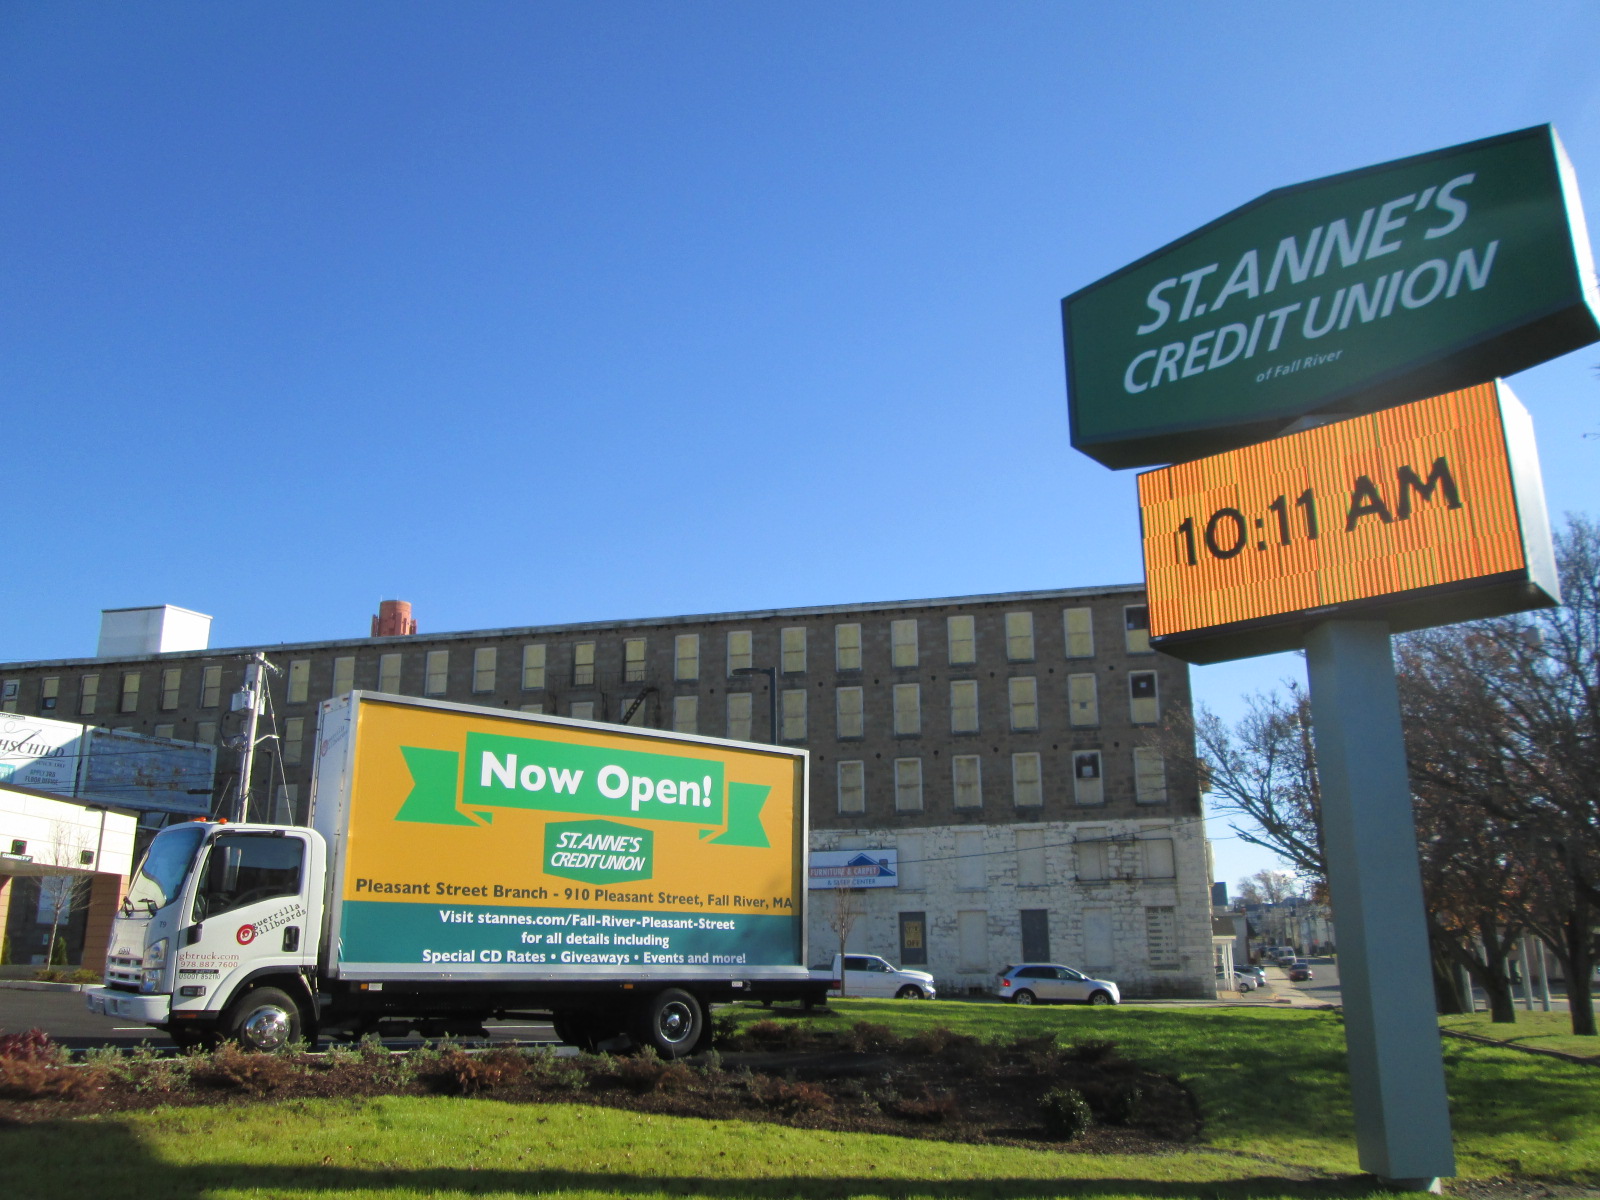 Mobile billboard truck stopped at St. Anne's Credit Union branch in Fall River MA